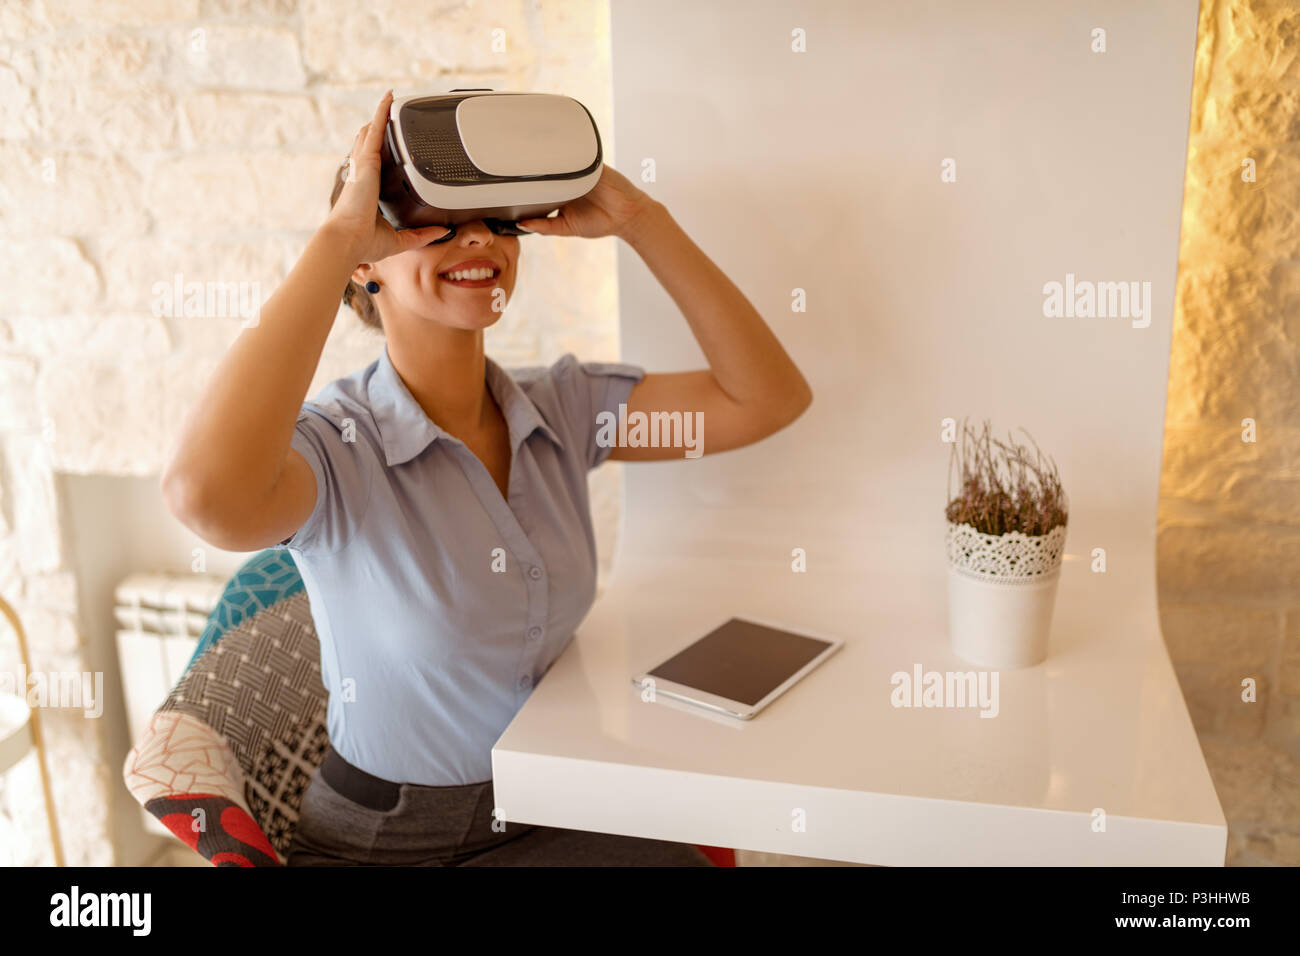 Smiling businesswoman using virtual reality glasses in a cafe. Stock Photo